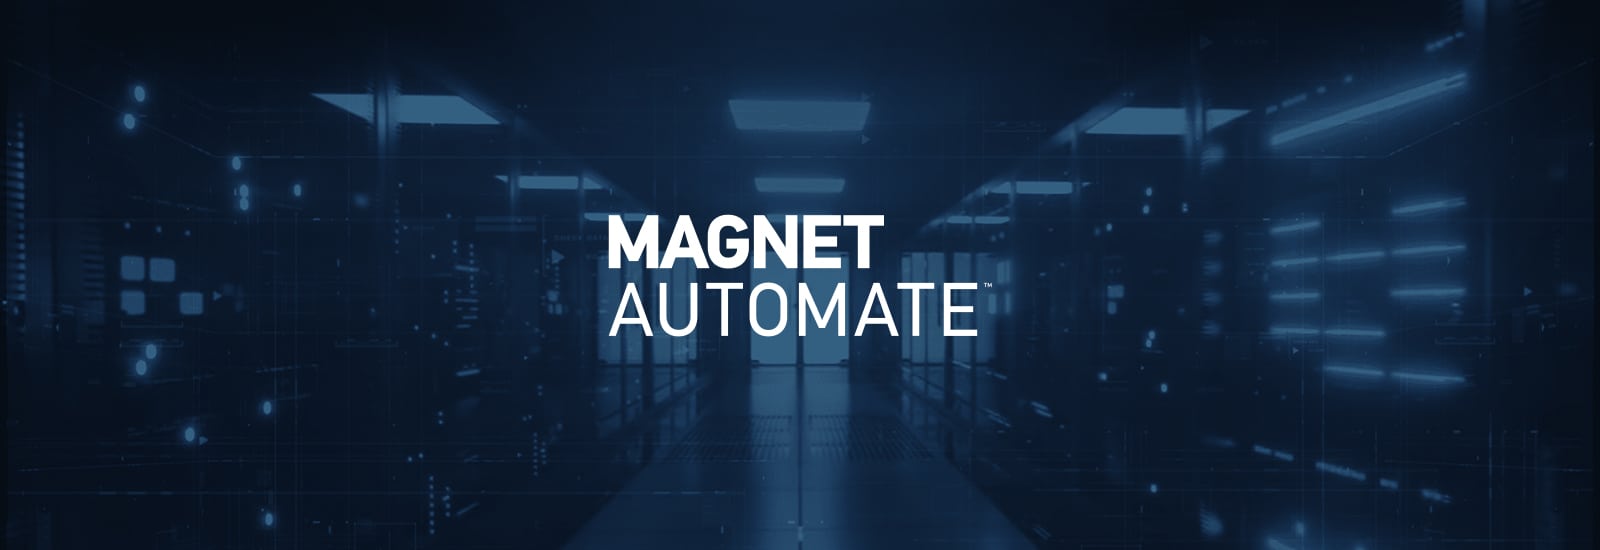 Decorative header image for Magnet AUTOMATE.